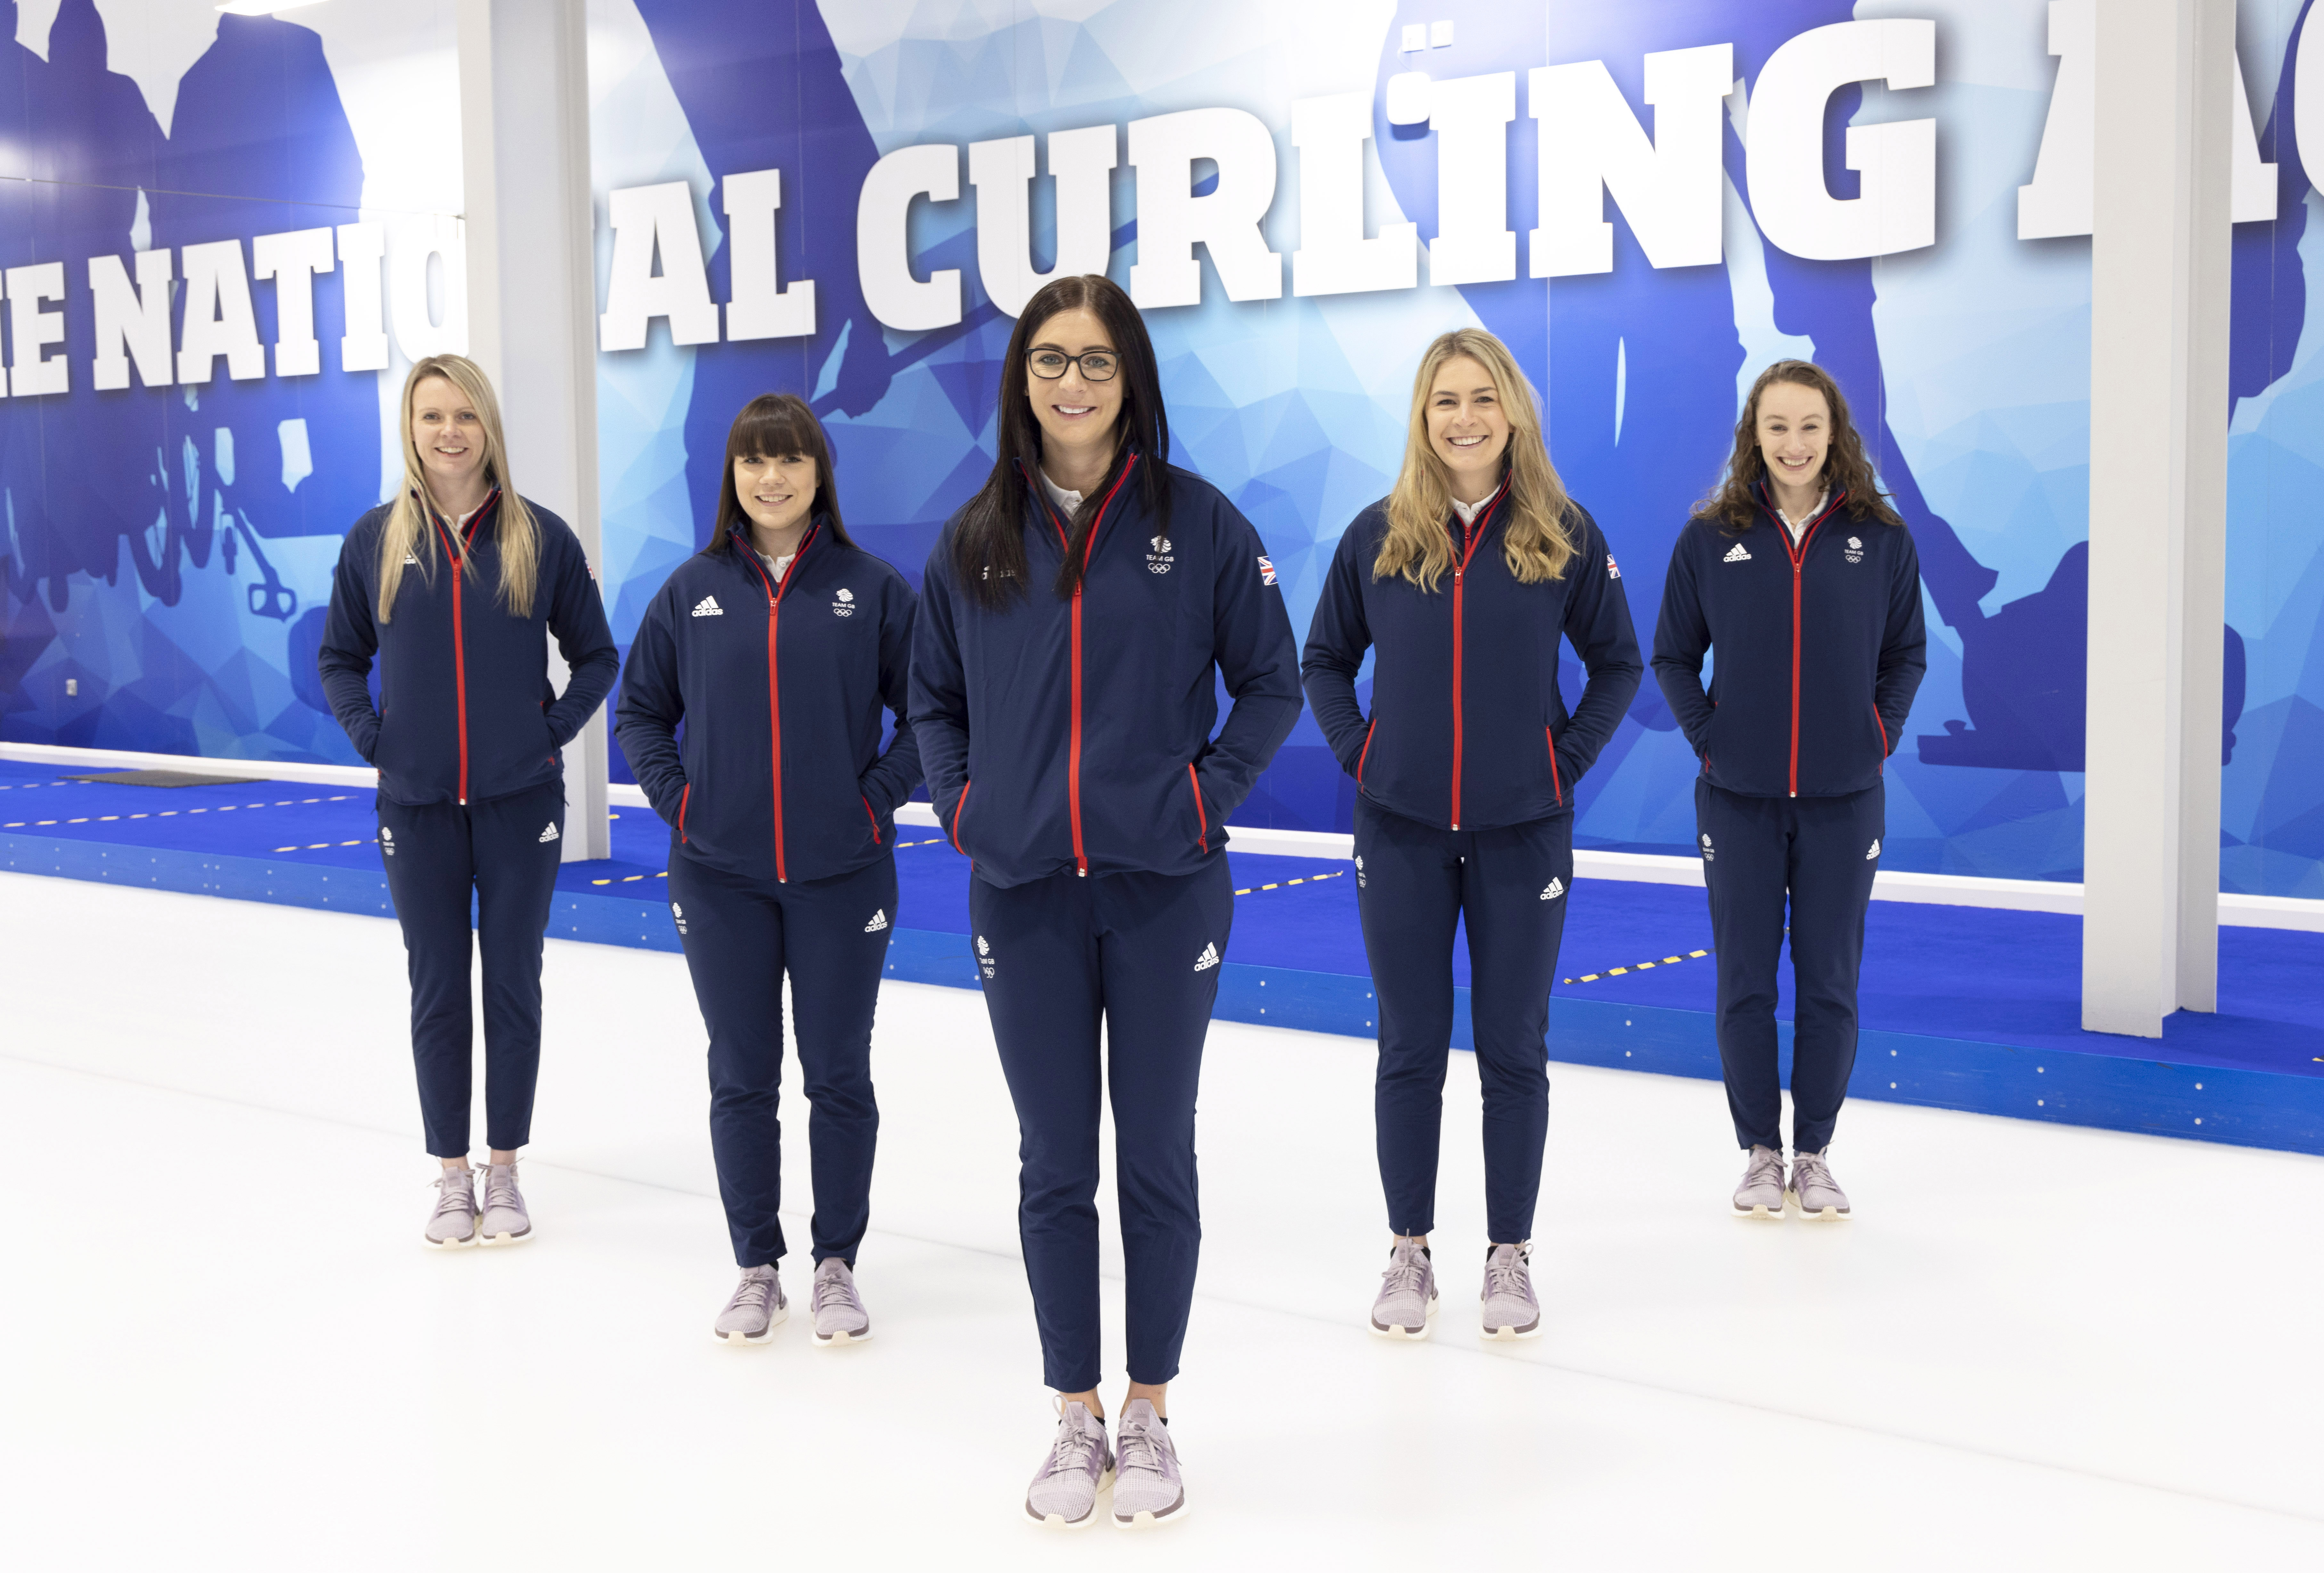 Team GB selects womens curling team for Beijing 2022 Team GB